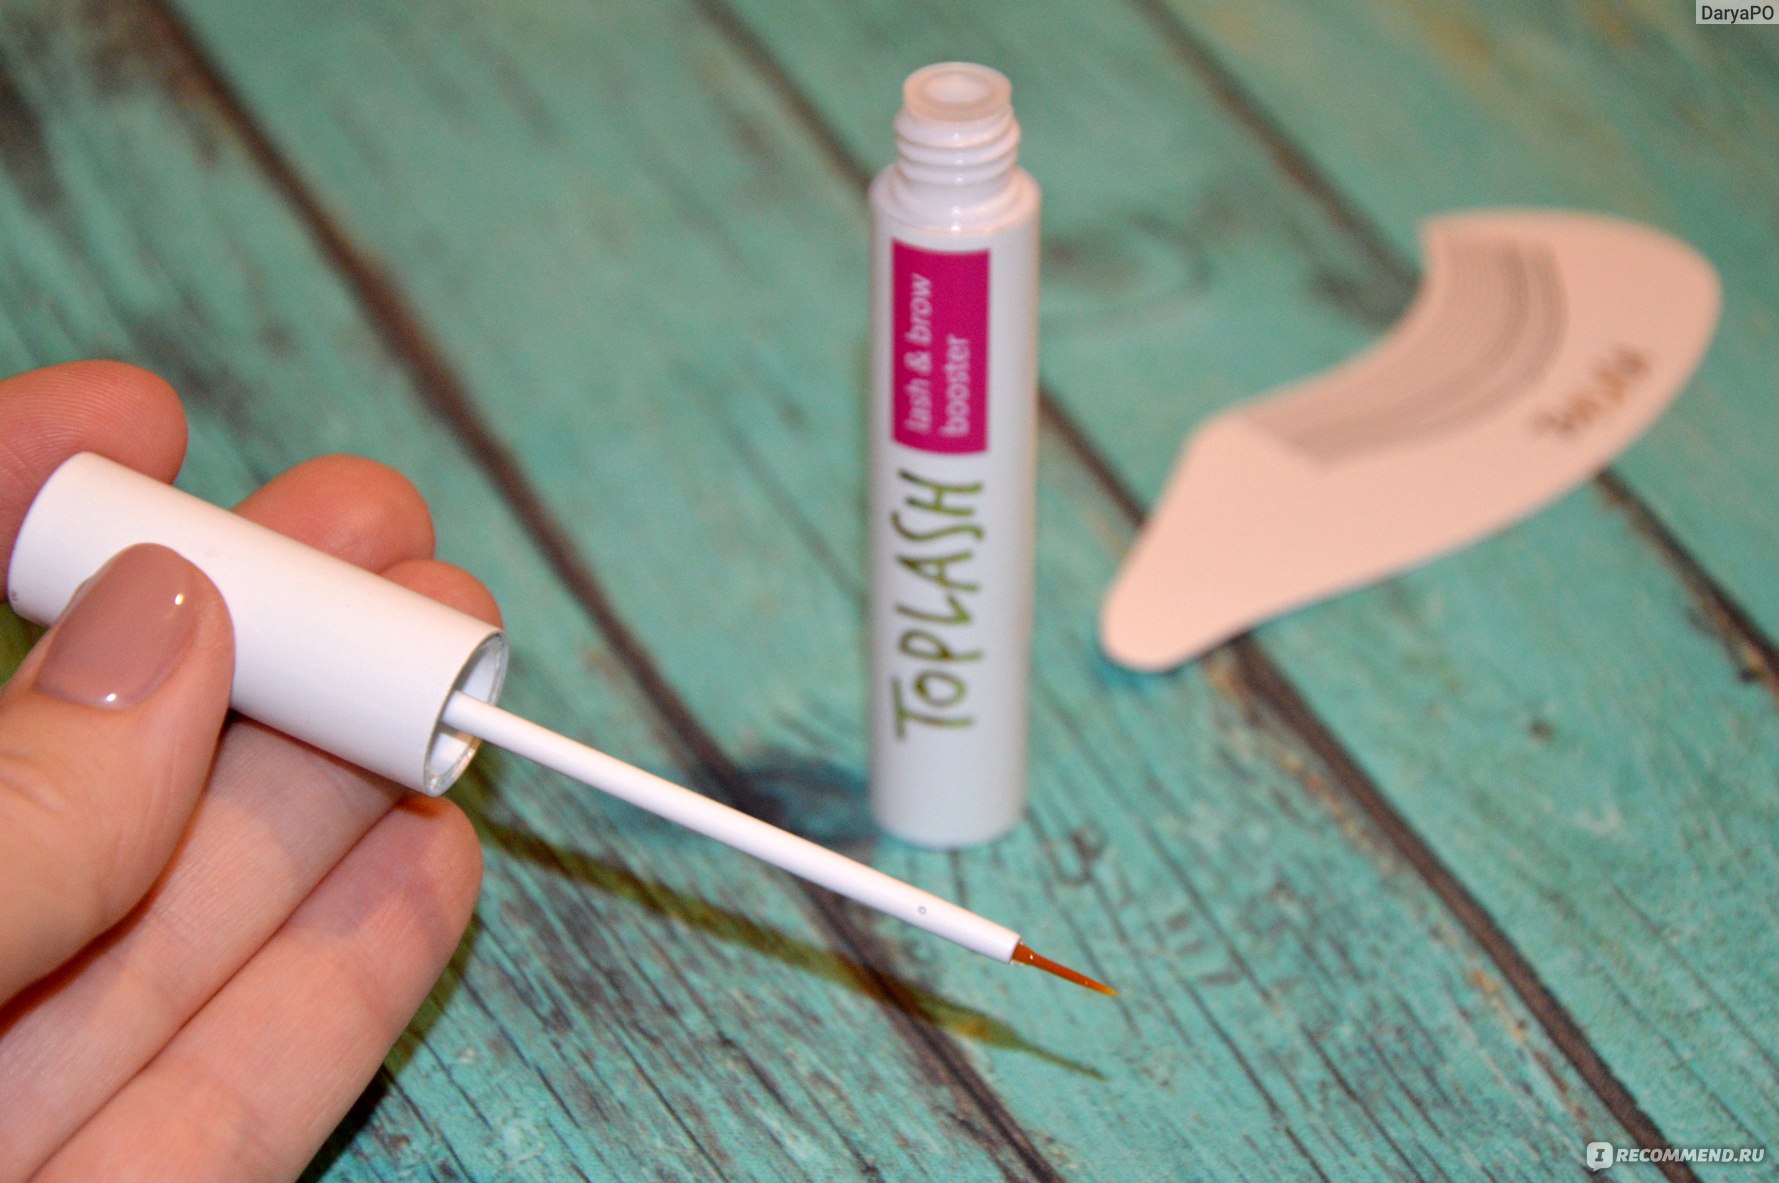 Toplash Lash and brow booster